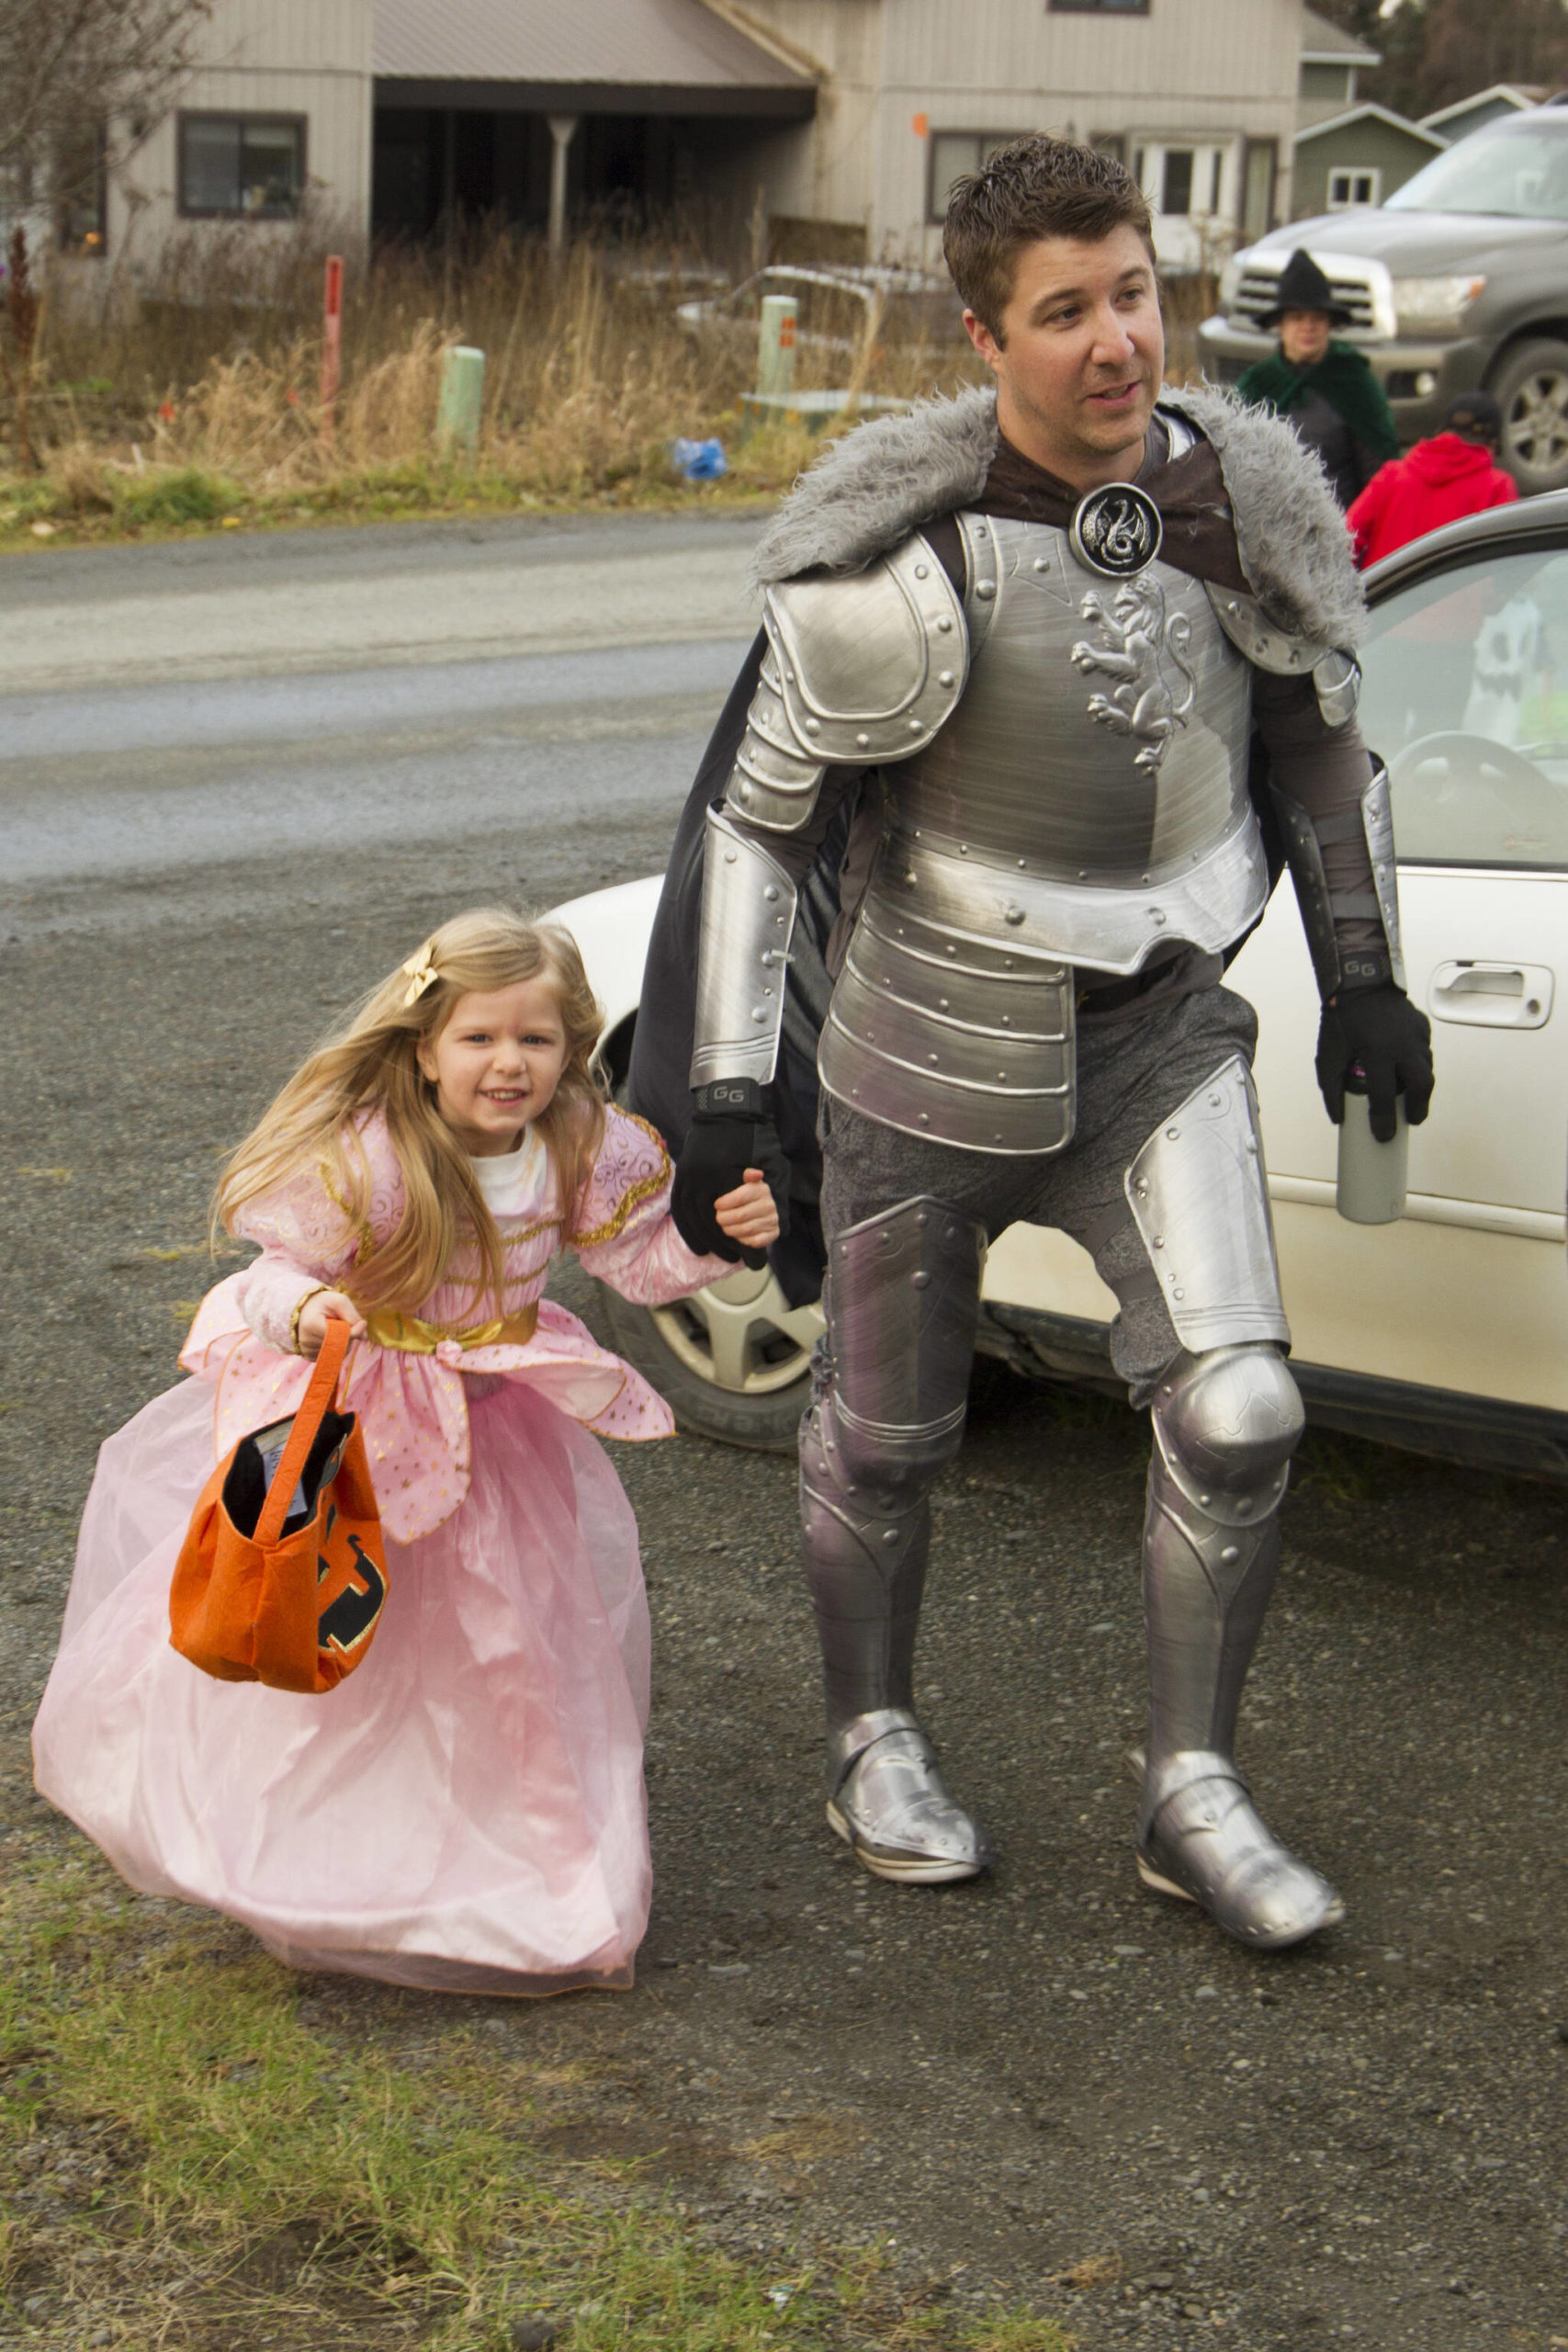 A princess and her knight in shining armor trick-or-treat on Bayview Avenue on Sunday, Oct. 31. (Photo by Sarah Knapp/Homer News)